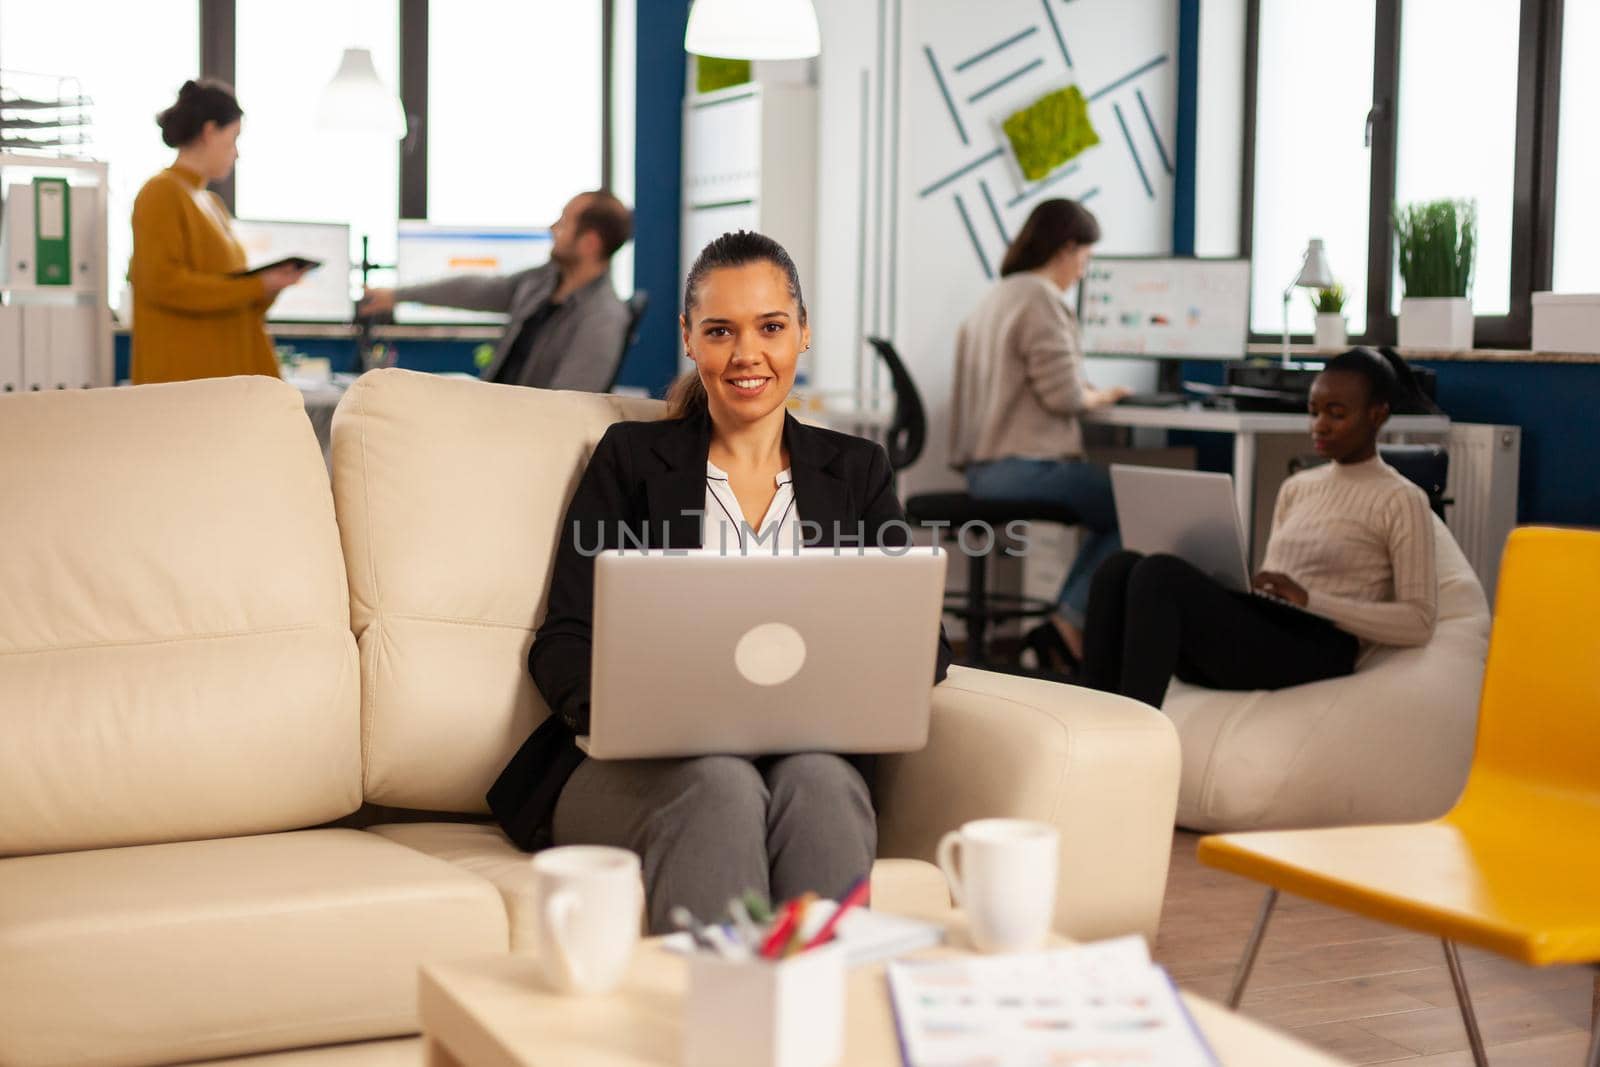 Manager lady writing on laptop looking at camera smiling while diverse colleagues working in background. Multiethnic coworkers talking about startup financial company in modern business office